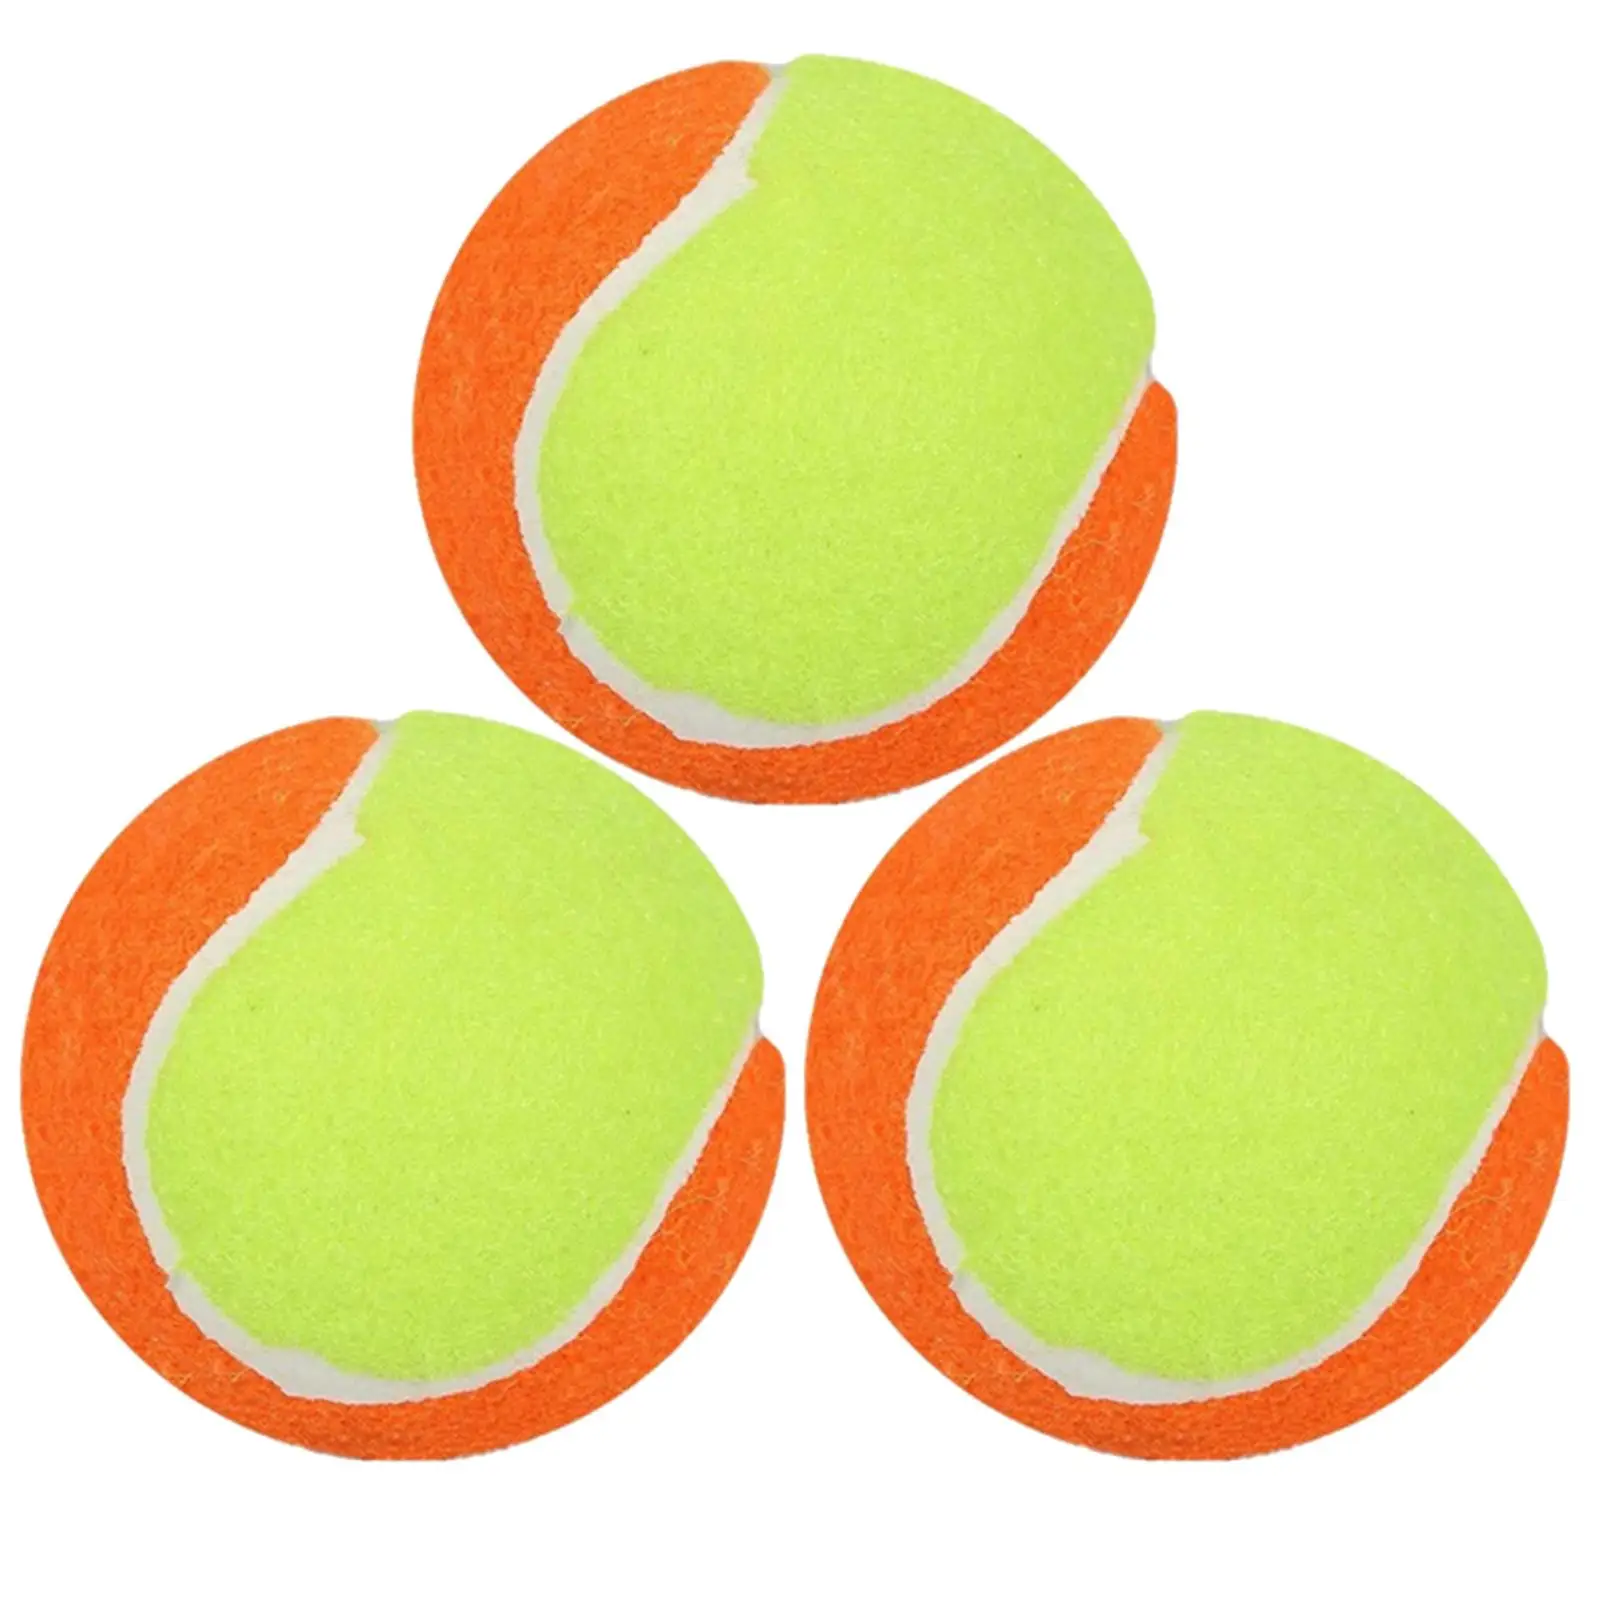 3 Pieces Tennis Balls Easily Track pinwheel Dog  Toy Dogs Chew Rubber Practice Tennis  for Tour Beach Indoor Dogs Beginners